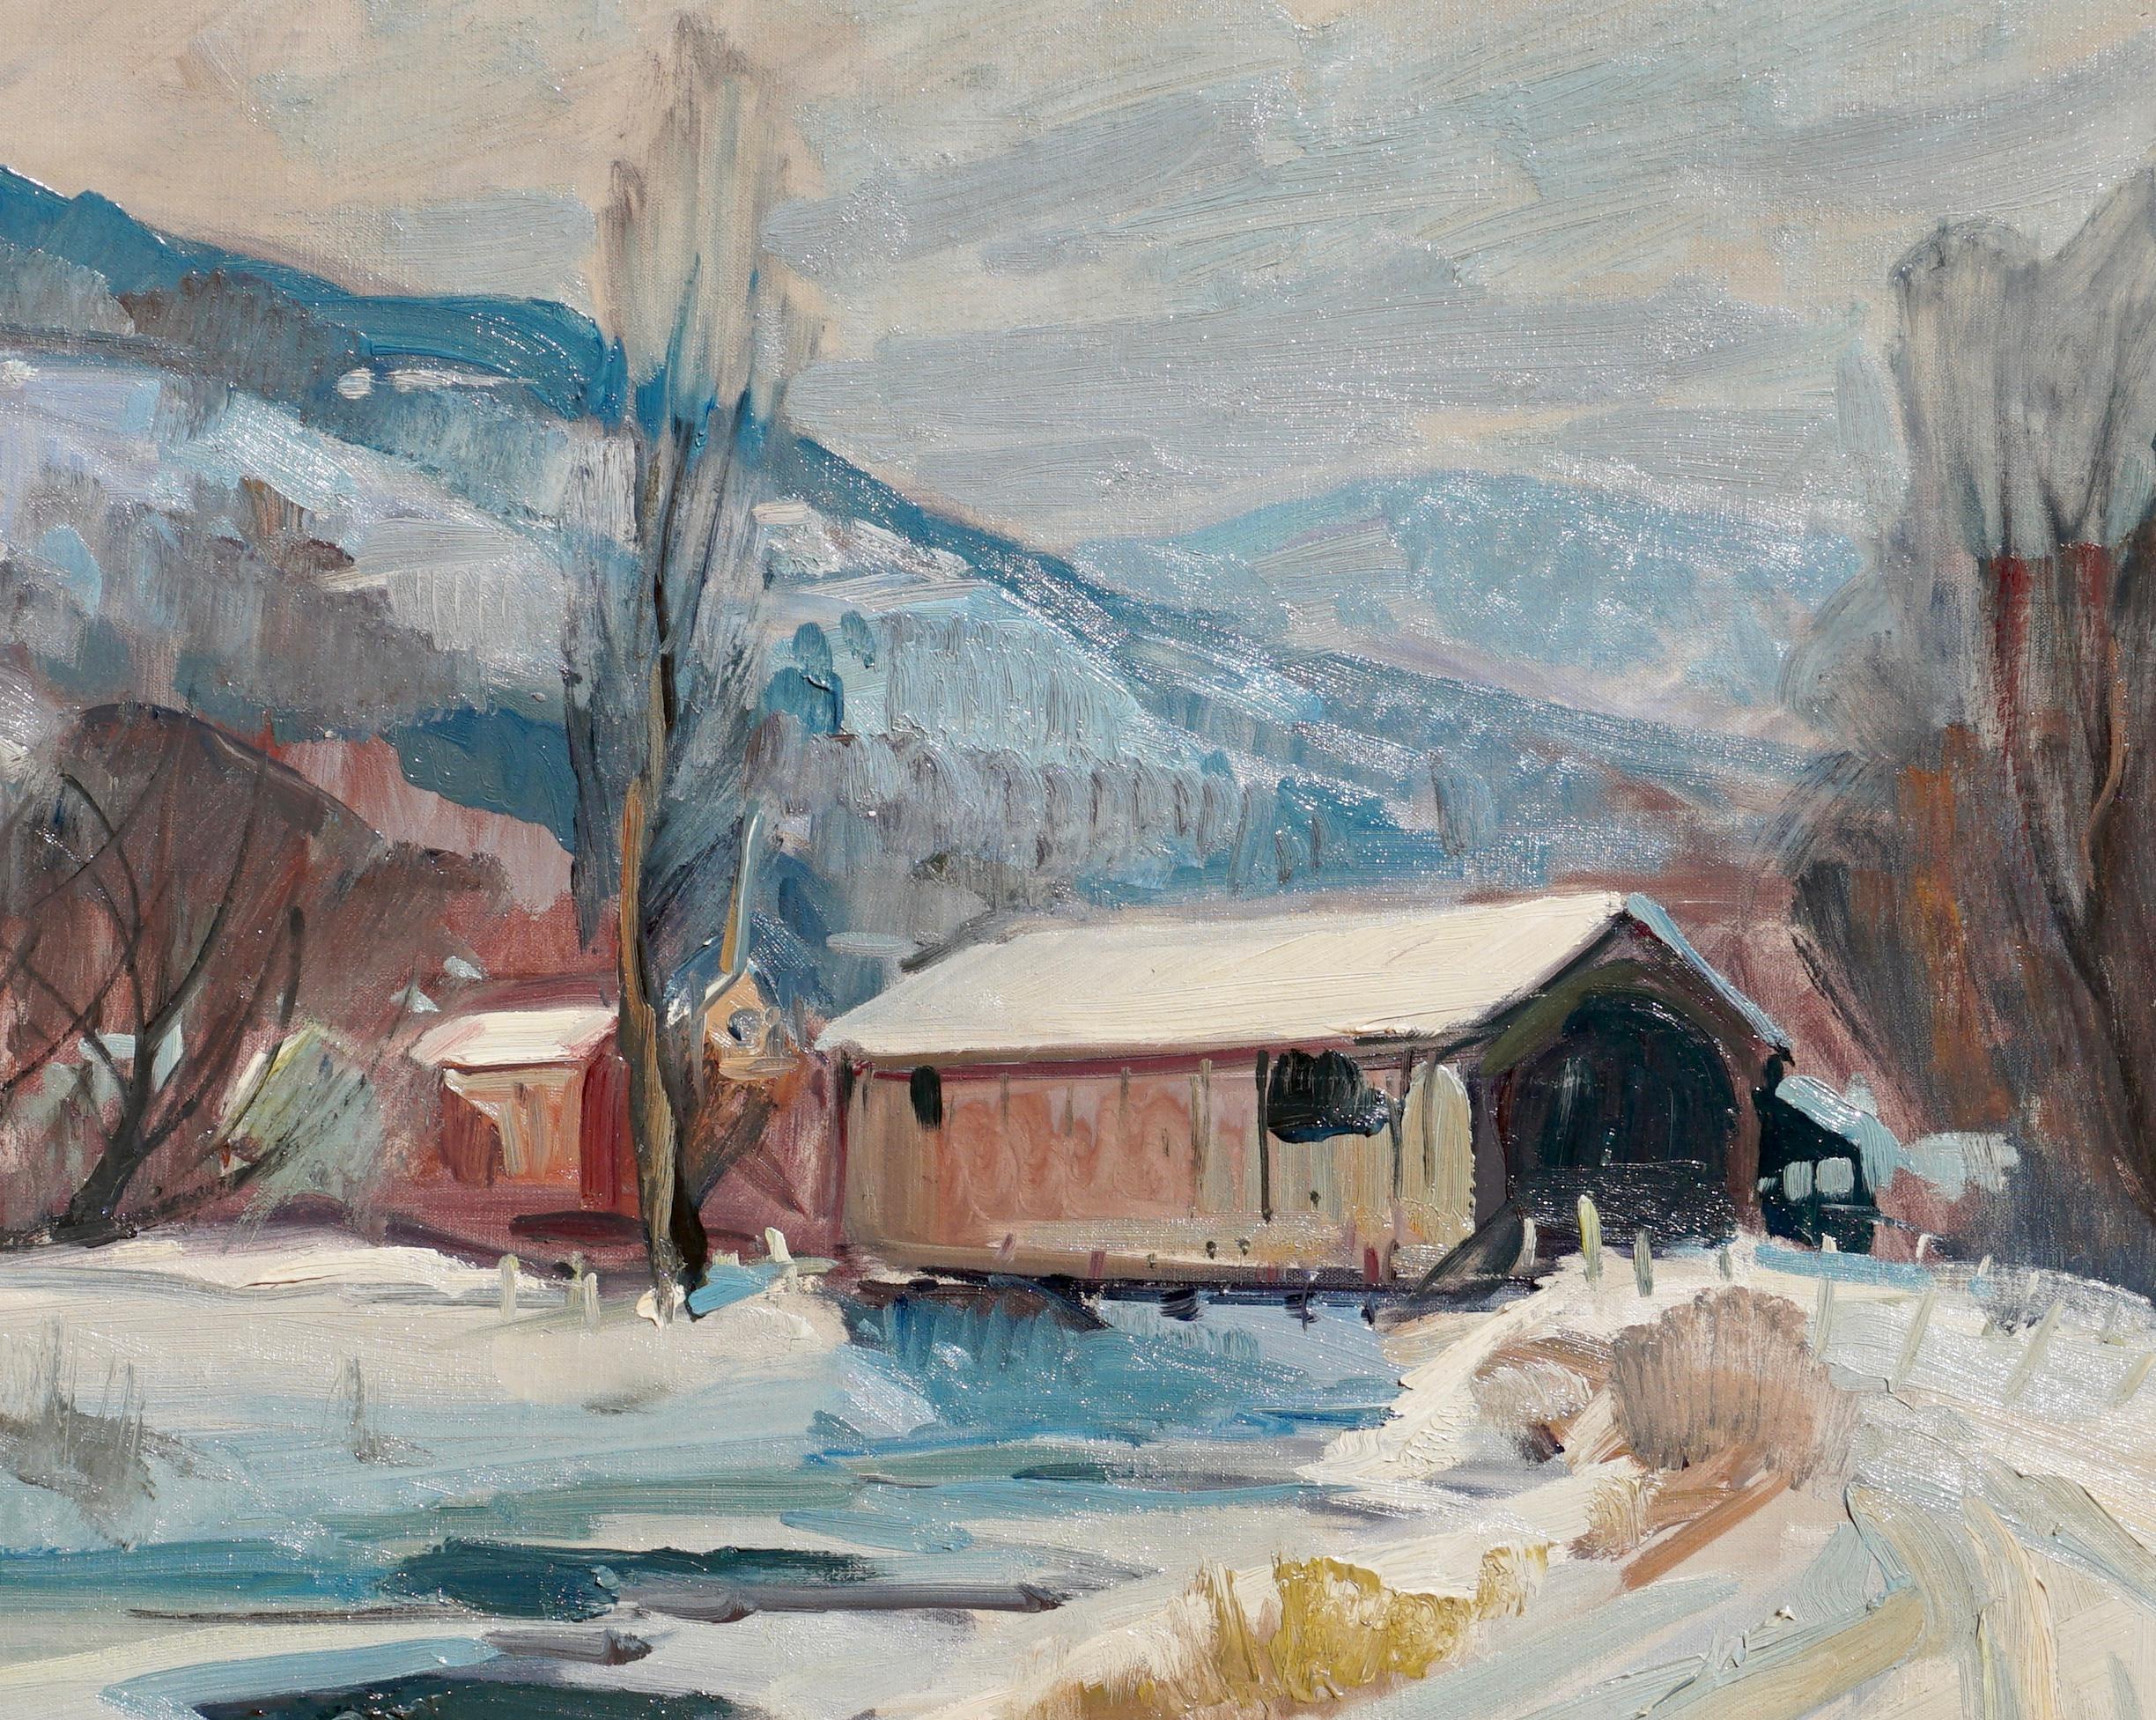 Emile Albert Gruppe 'Mass 1896-1978' “Covered Bridge” Snow Painting For Sale 1